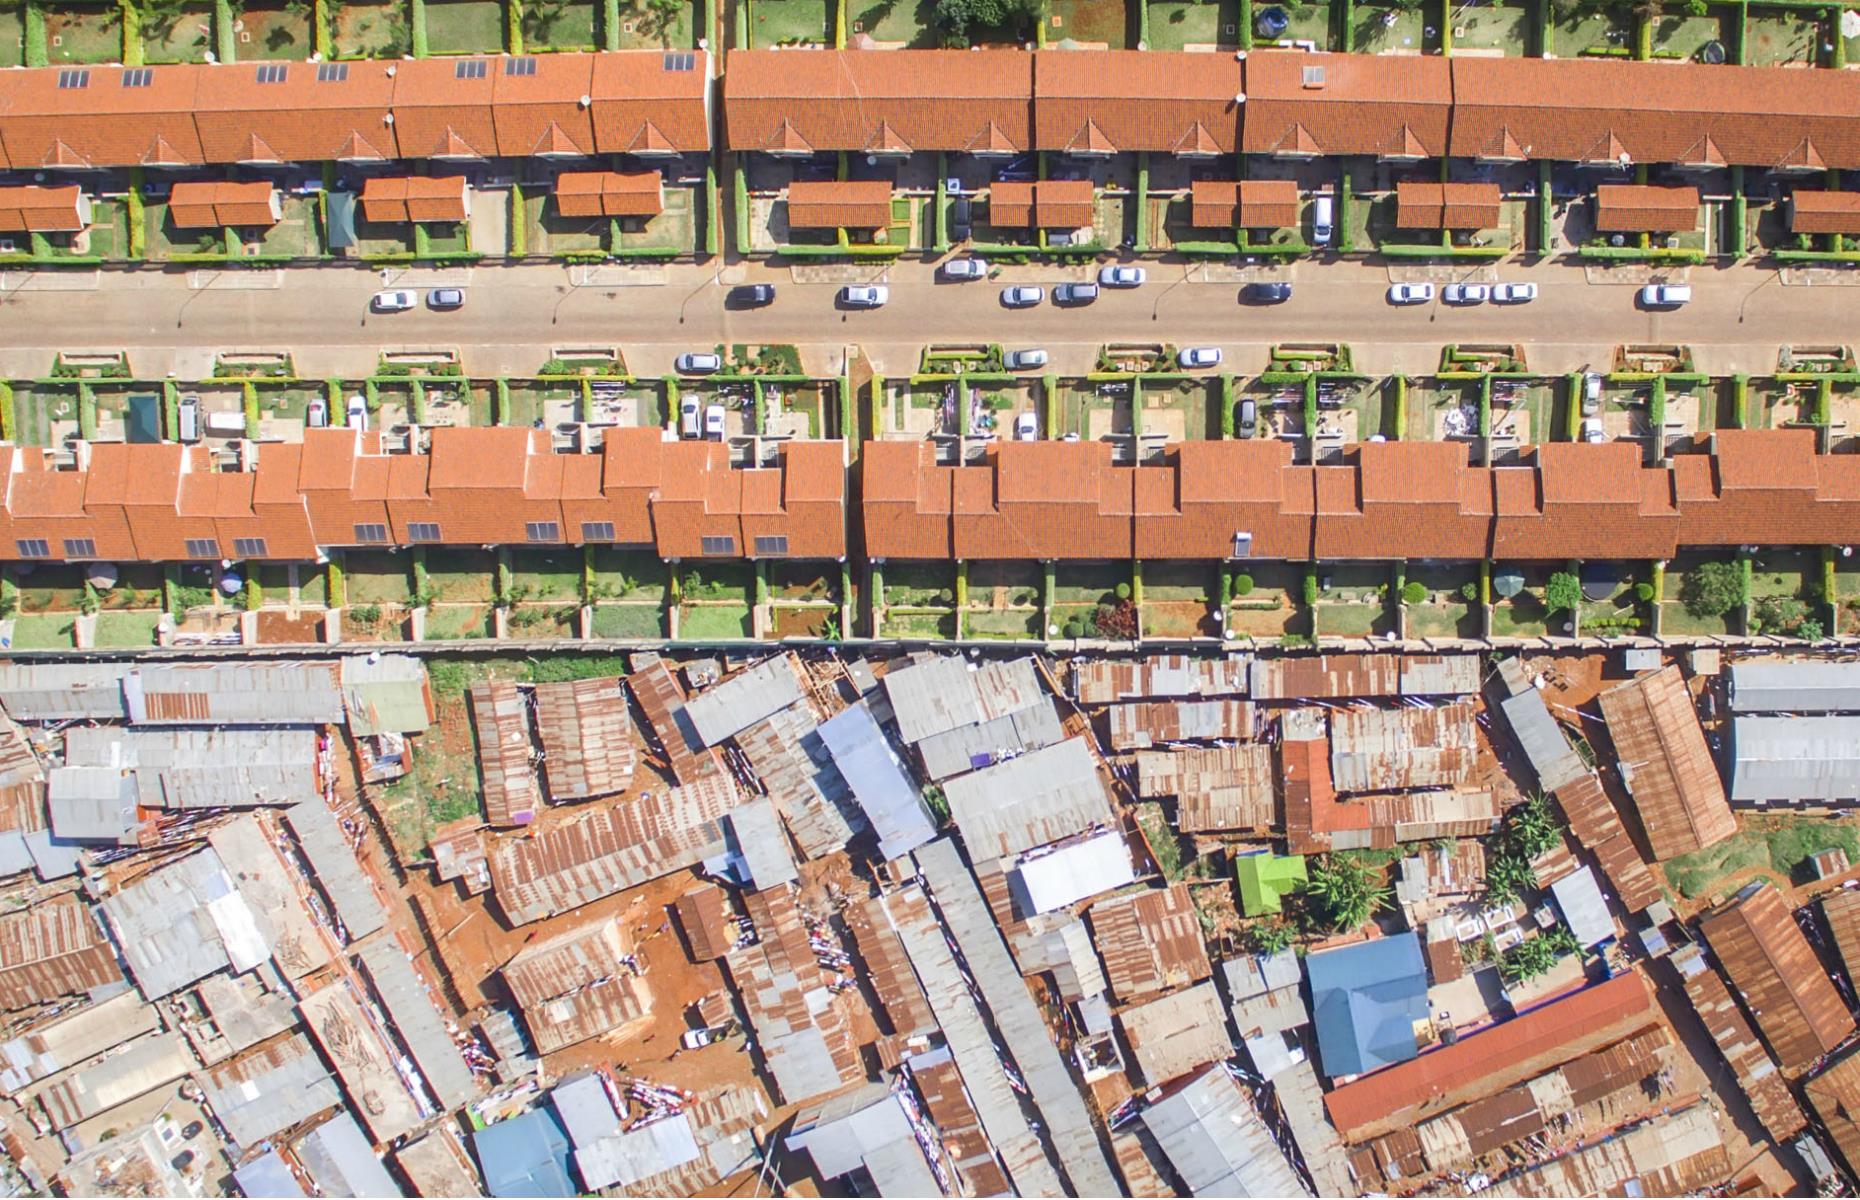 <p>Loresho is home to Nairobi's more affluent citizens, such as government workers and businesspeople. Here the neat and uniform fenced-off gardens of Loresho's rich inhabitants back onto the disordered maze of the slum's homes.</p>